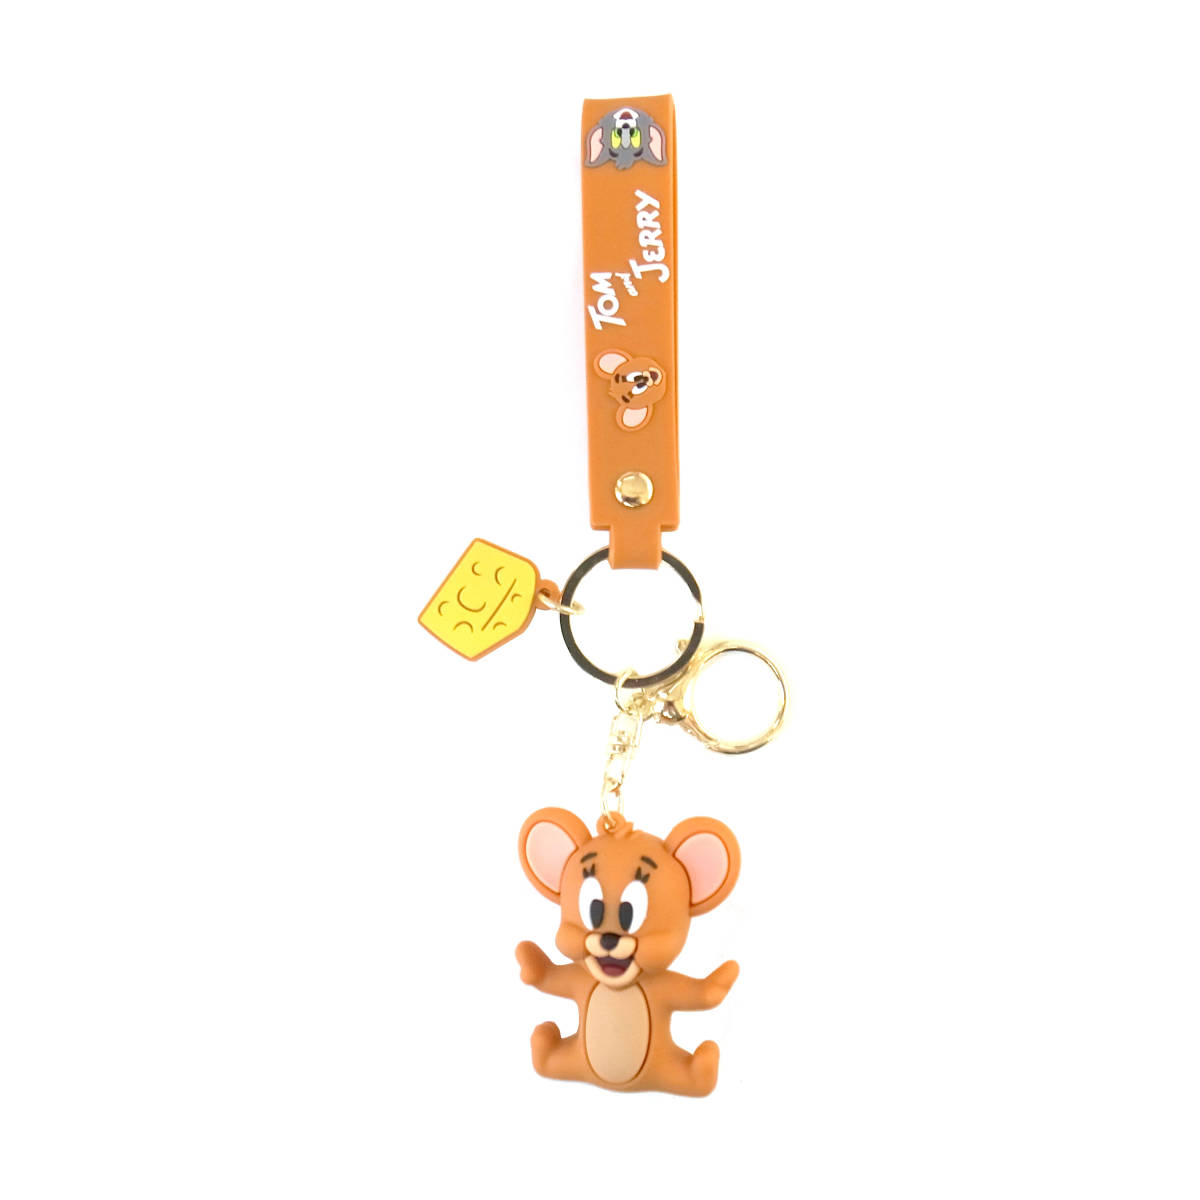  Tom . Jerry solid mascot key holder with strap . Jerry design 